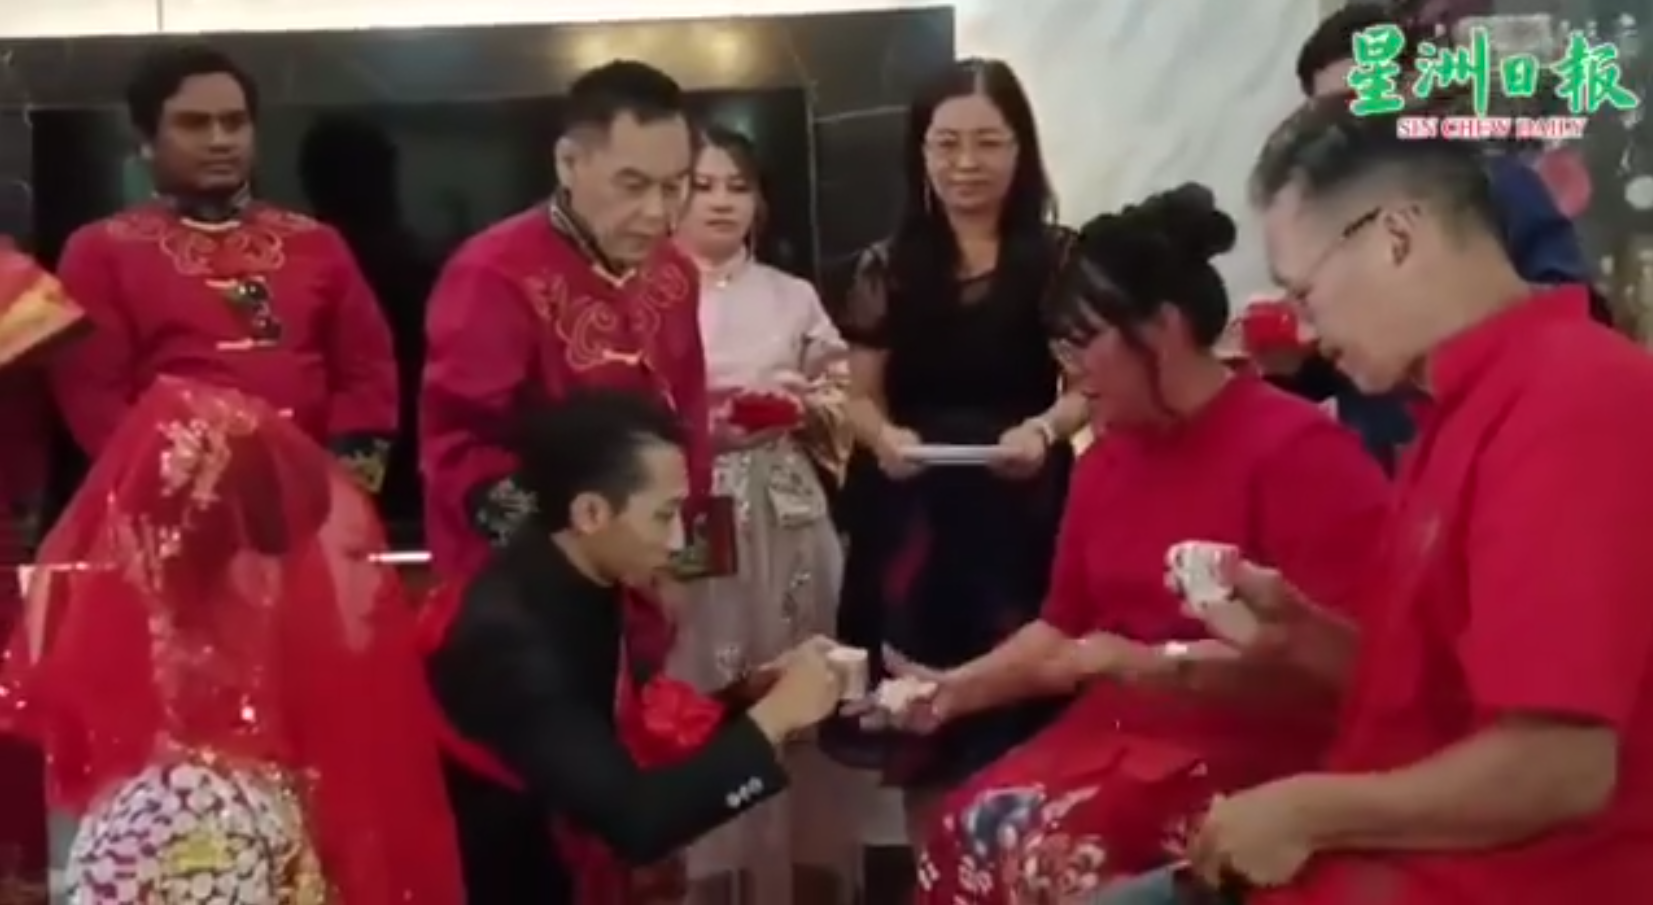 M'sian muslim man praised for honoring wife's heritage with traditional chinese wedding | weirdkaya